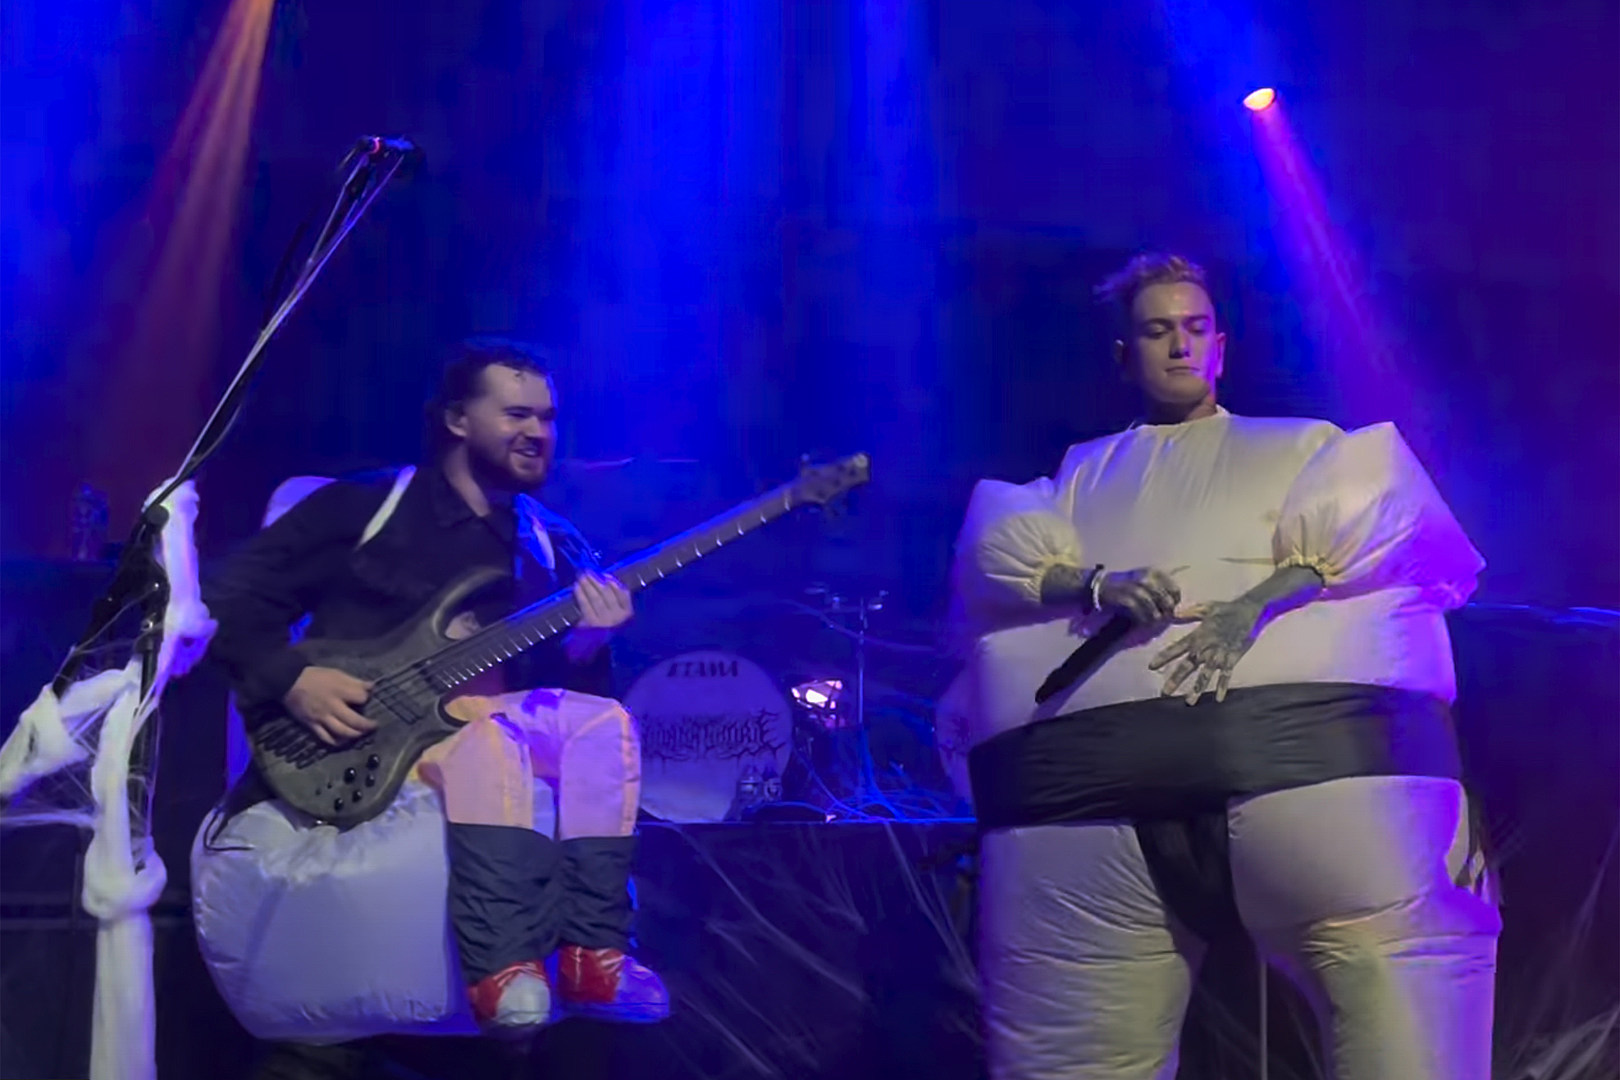 Watch Lorna Shore’s Will Ramos Play Halloween Show in Sumo Suit